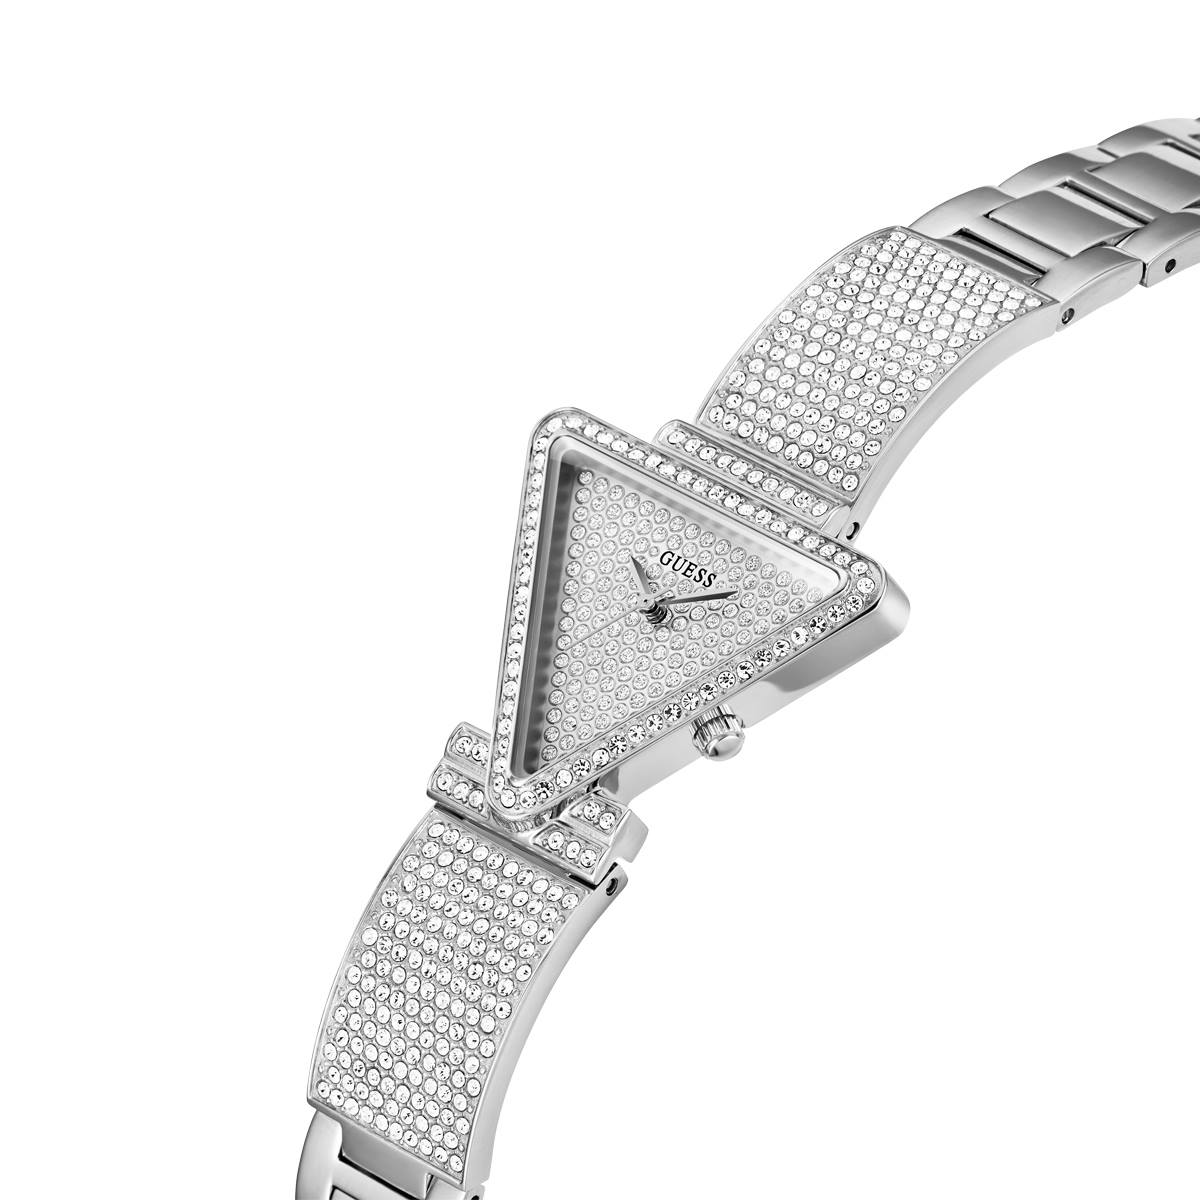 Guess Watches(R) Silver Tone Crystal Triangle Analog Watch-GW0644L1